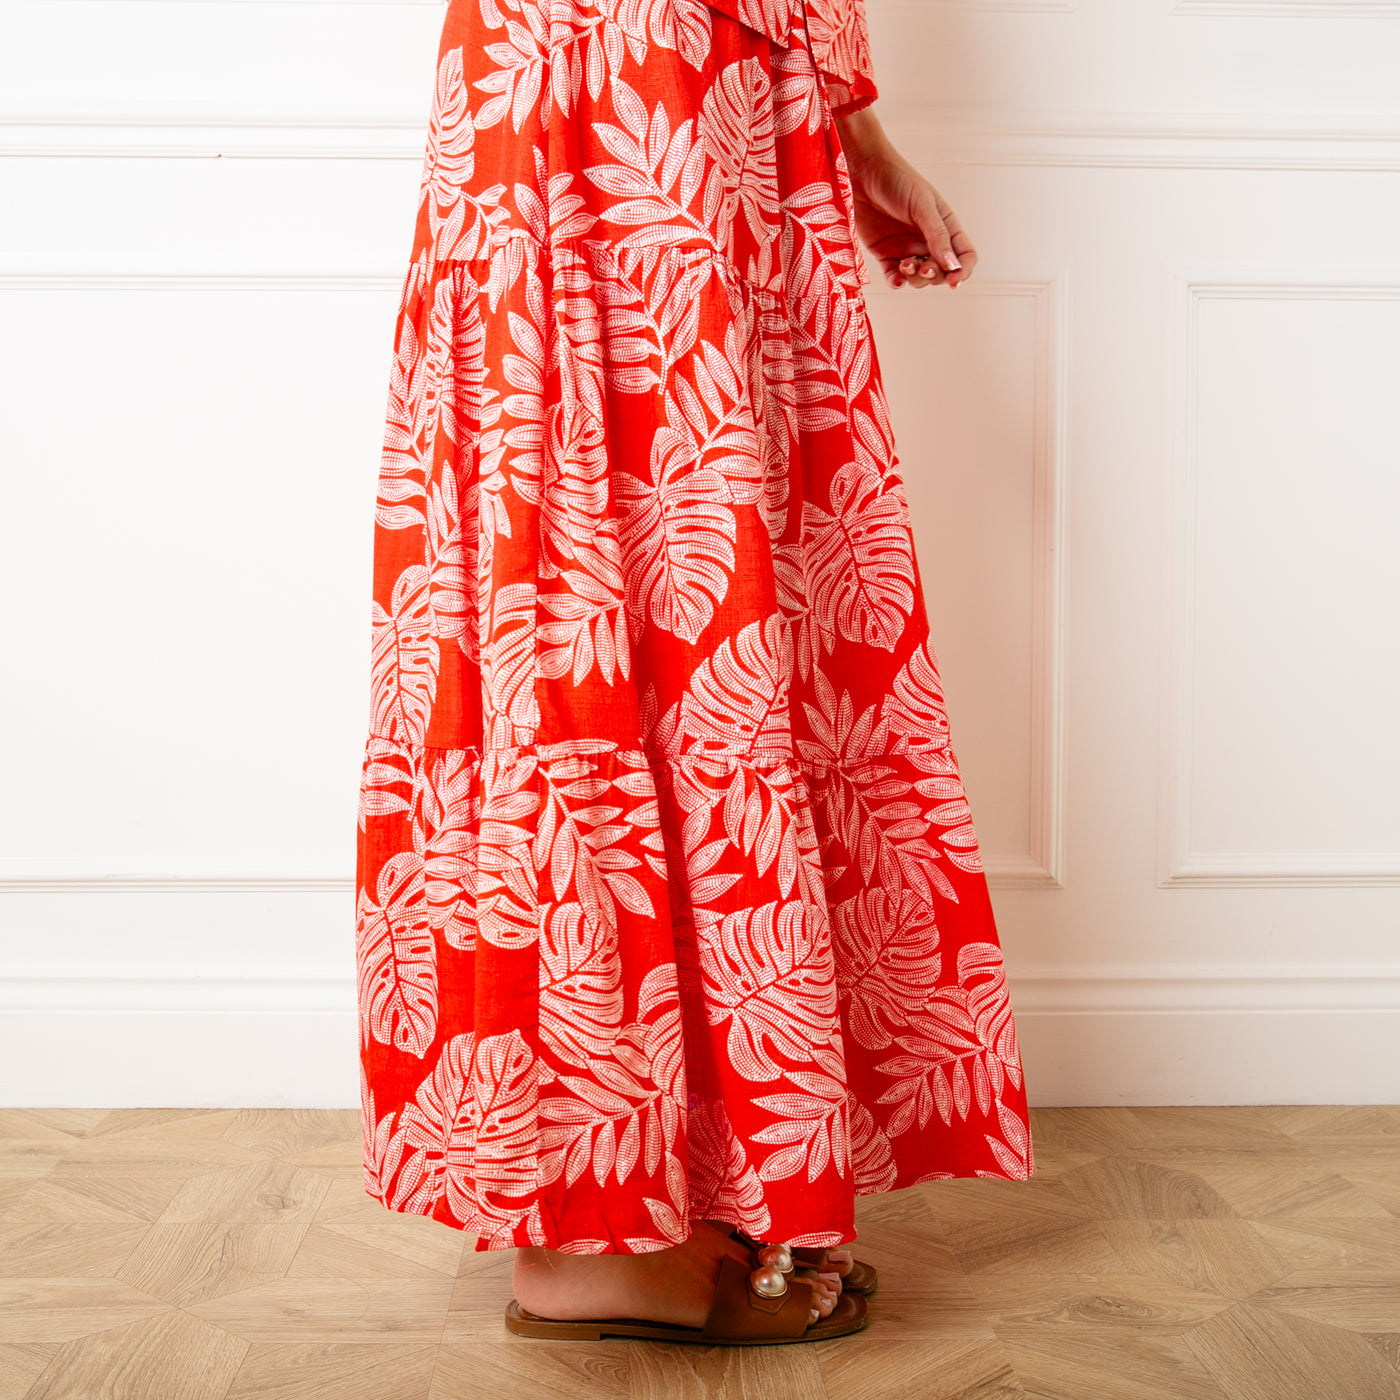 The red Linen Leaf Tiered Skirt with an elasticated waistband for extra comfort